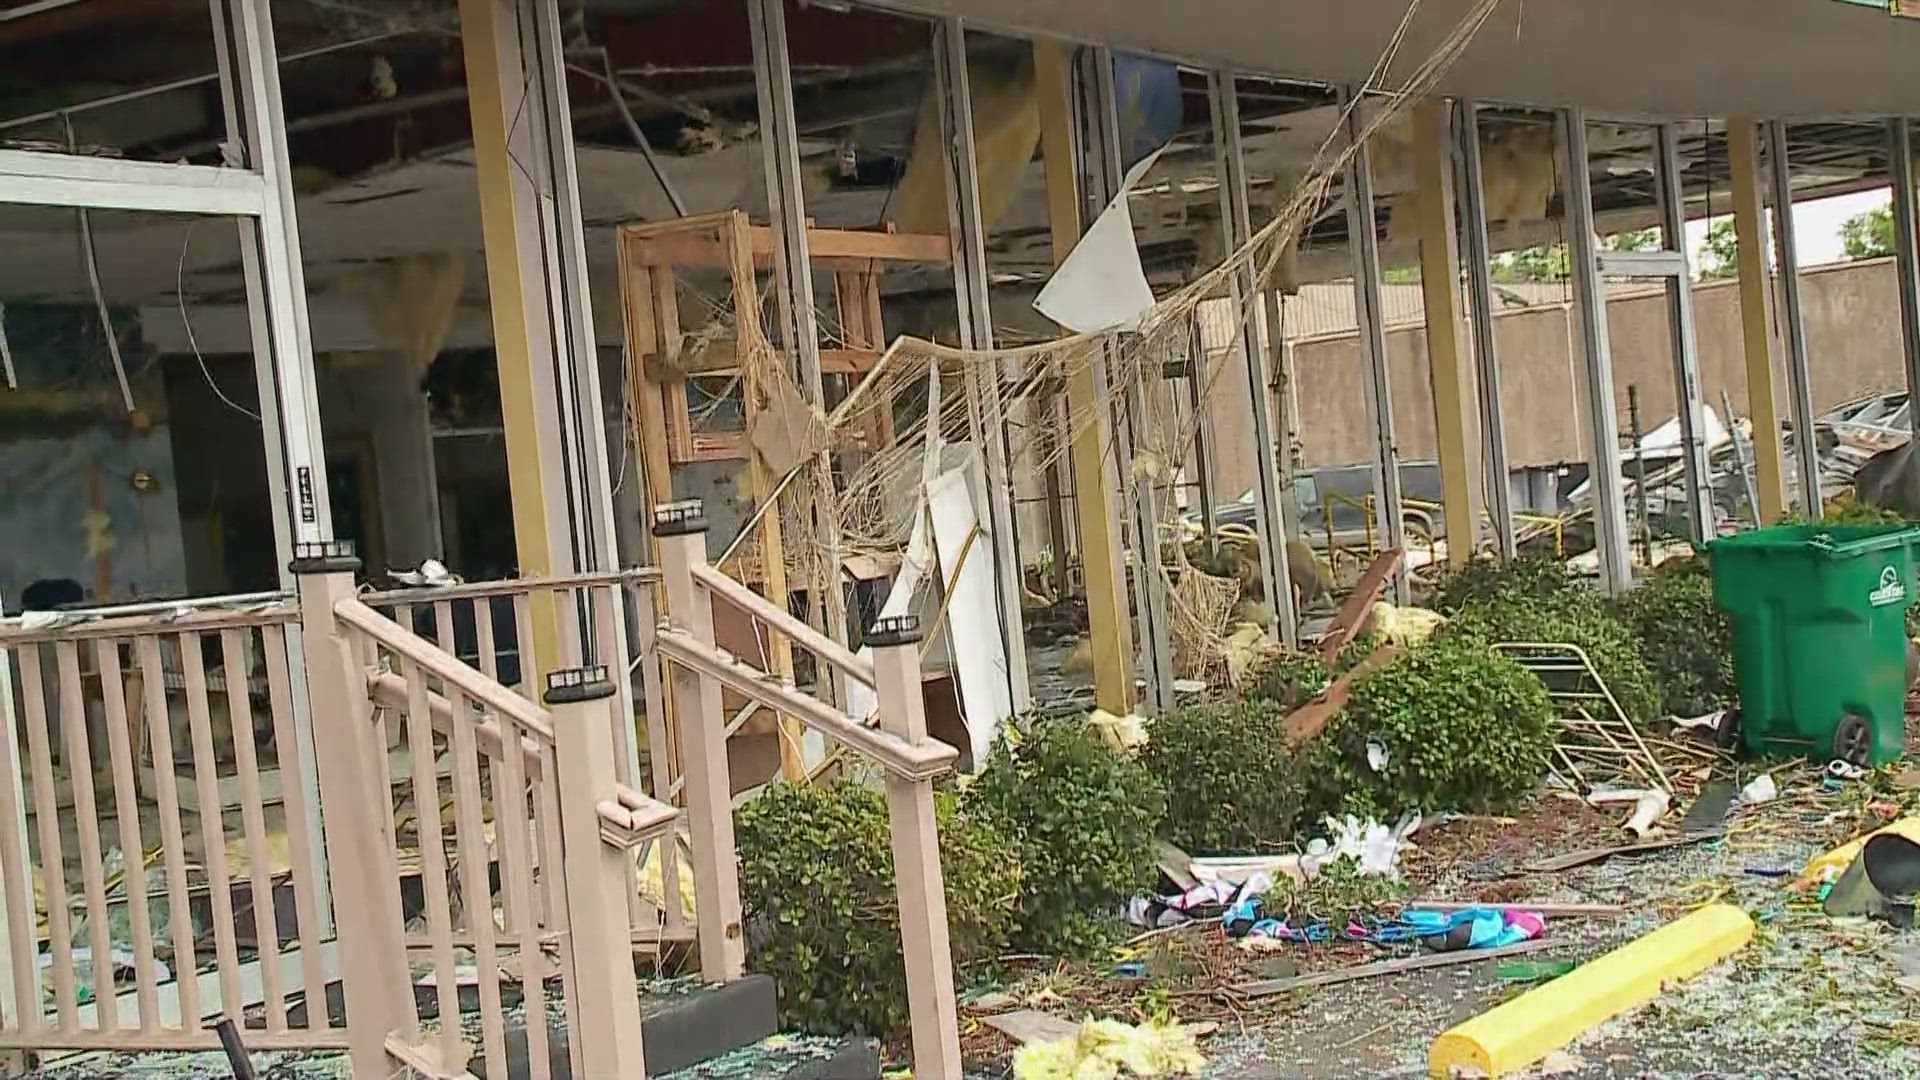 Nobody was hurt after the roof fell in at a Slidell beauty parlor during Wednesday storms